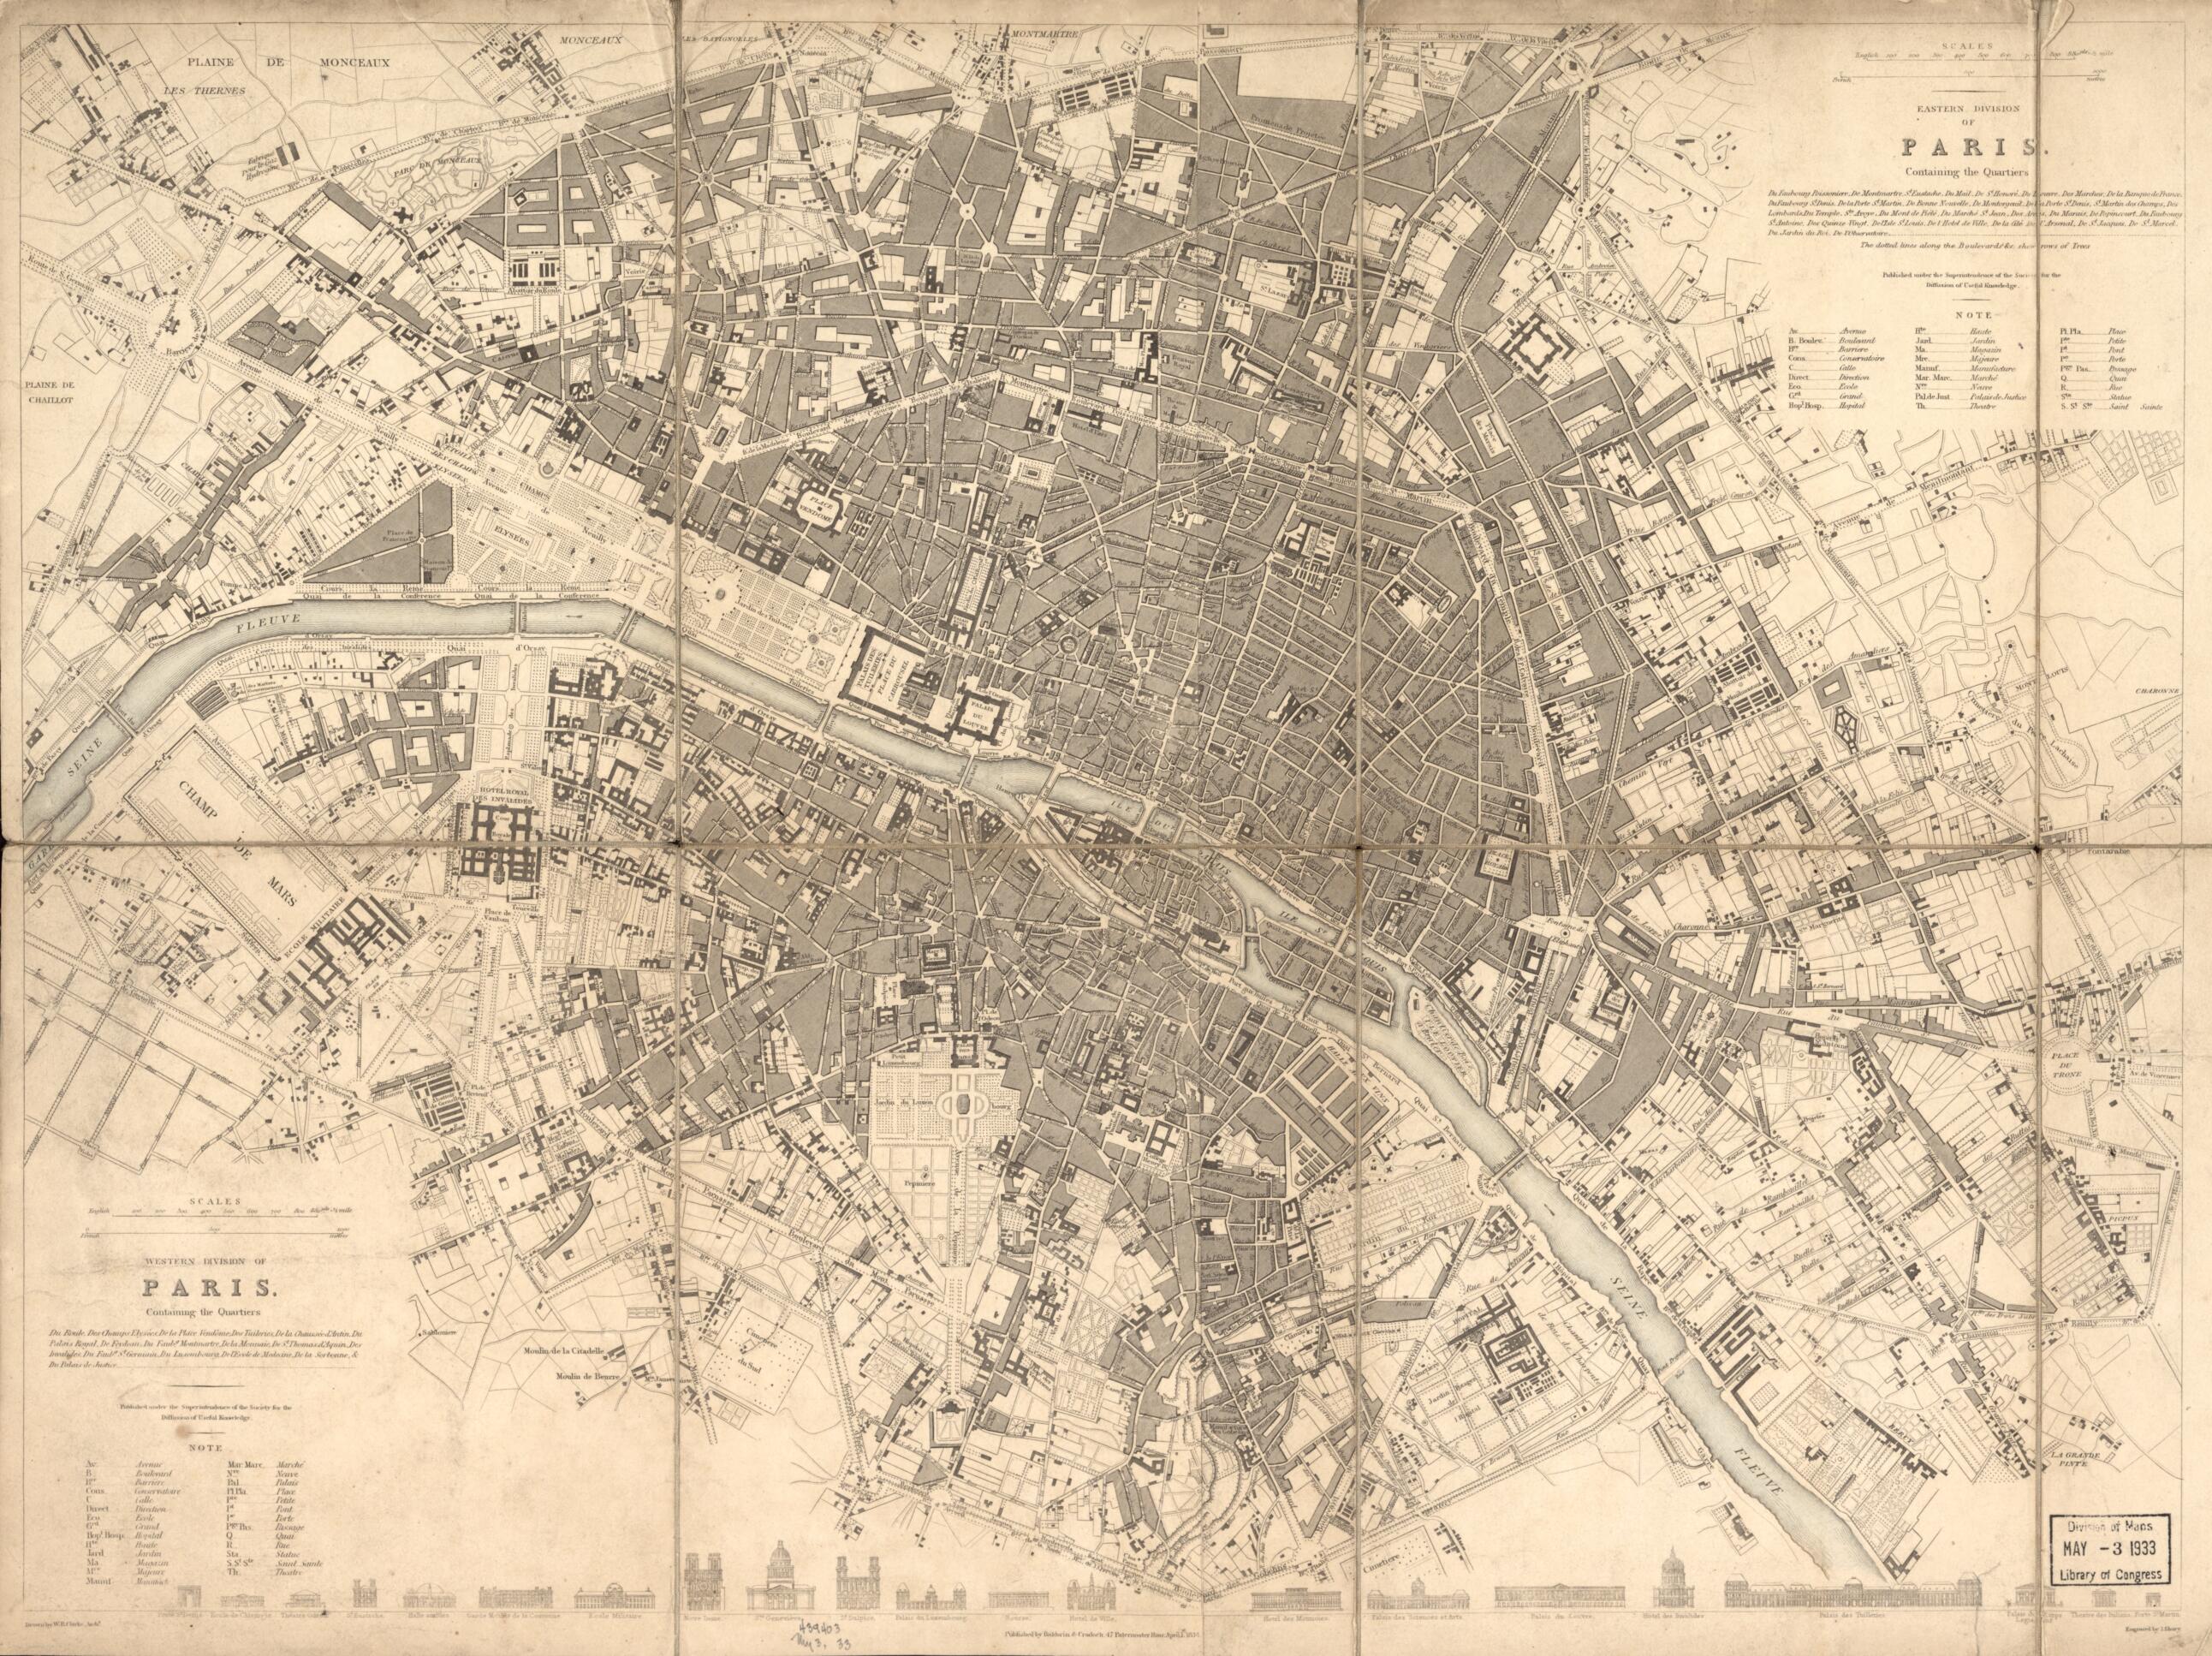 This old map of Eastern Division of Paris : Containing the Quartiers from 1834 was created by W. B. Clarke, James Shury,  Society for the Diffusion of Useful Knowledge (Great Britain) in 1834